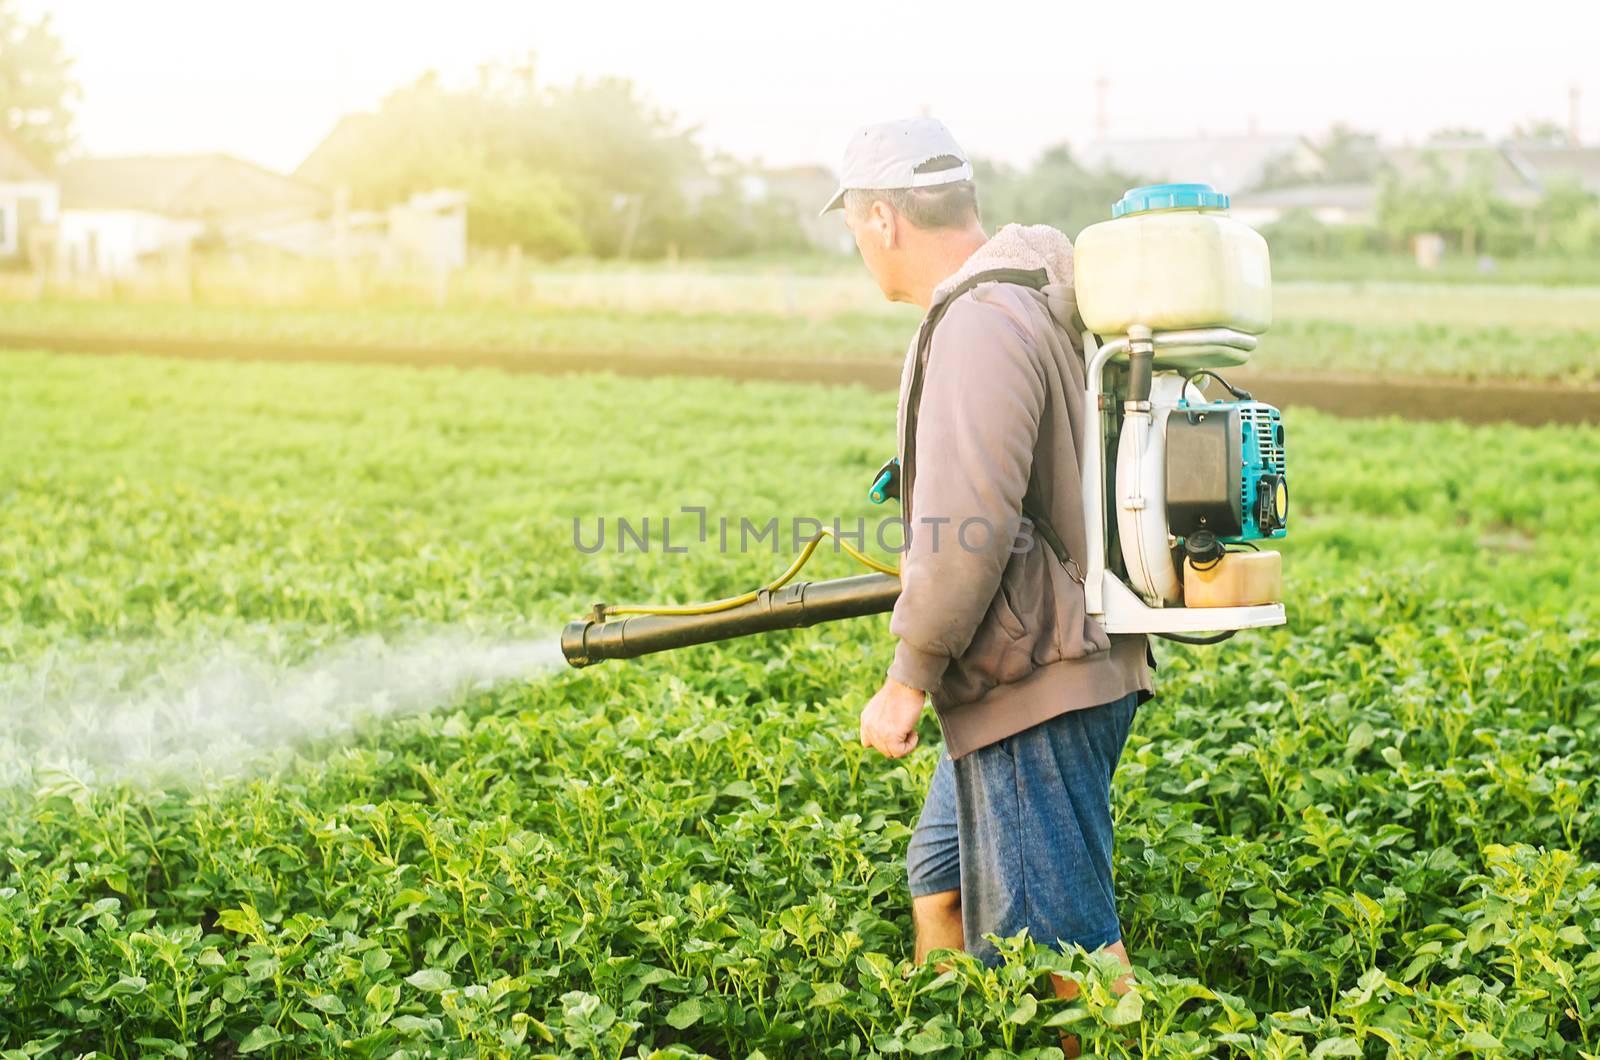 A farmer with a mist sprayer treats the potato plantation from pests and fungus infection. Use chemicals in agriculture. Agriculture and agribusiness. Harvest processing. Protection and care by iLixe48